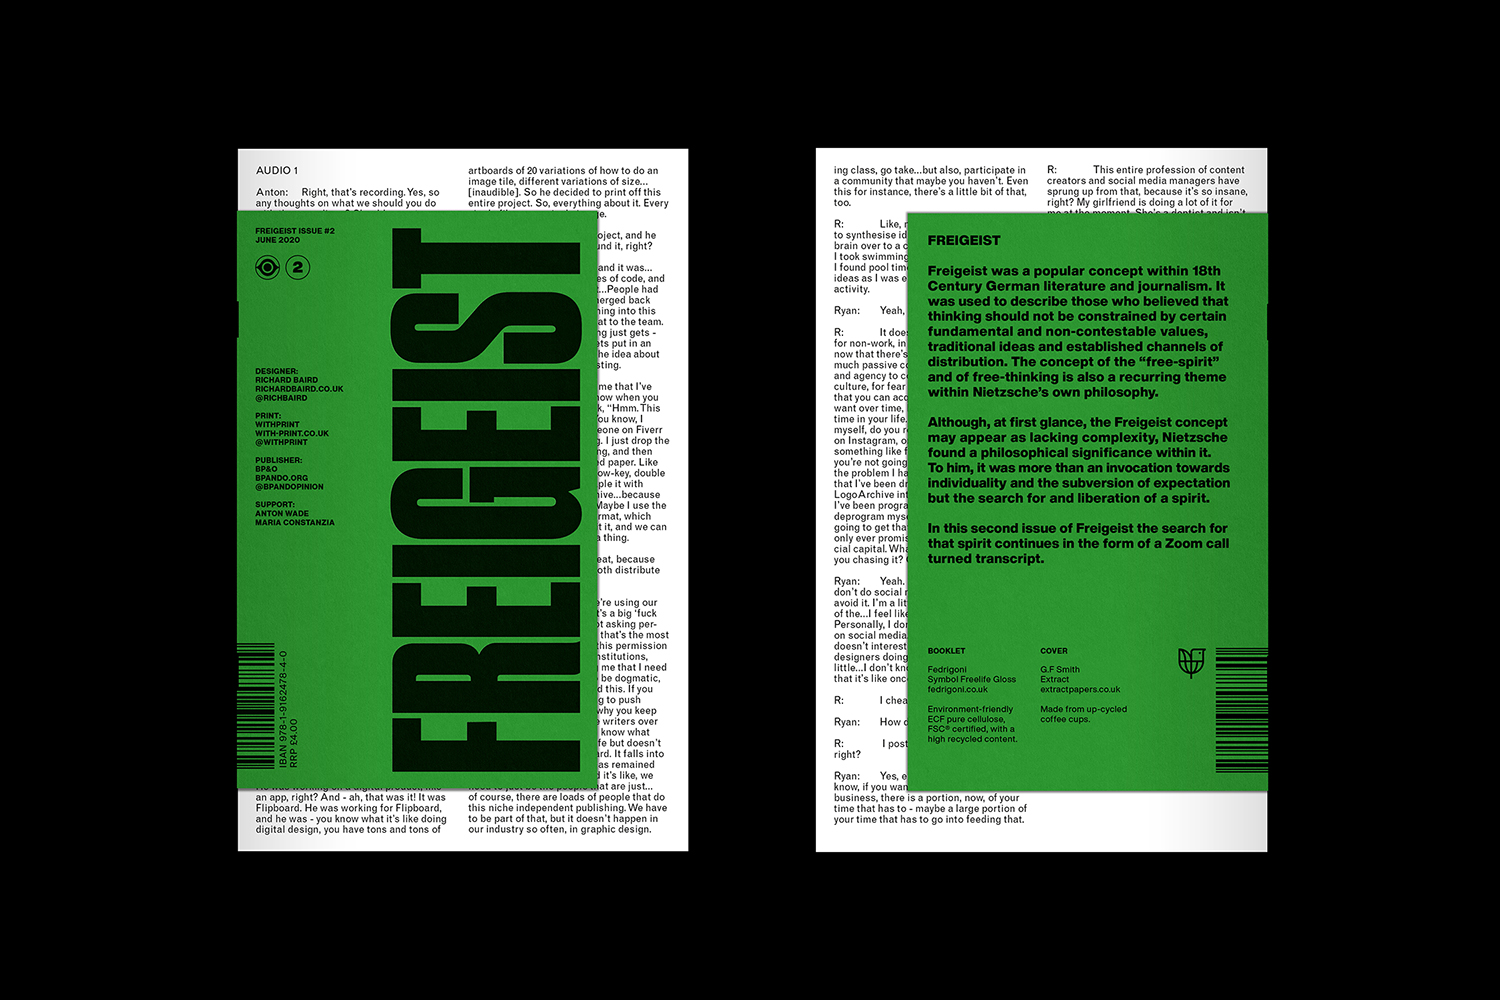 Freigeist Zine returns with Issue 2, a Zoom call turned transcript designed and edited by Richard Baird